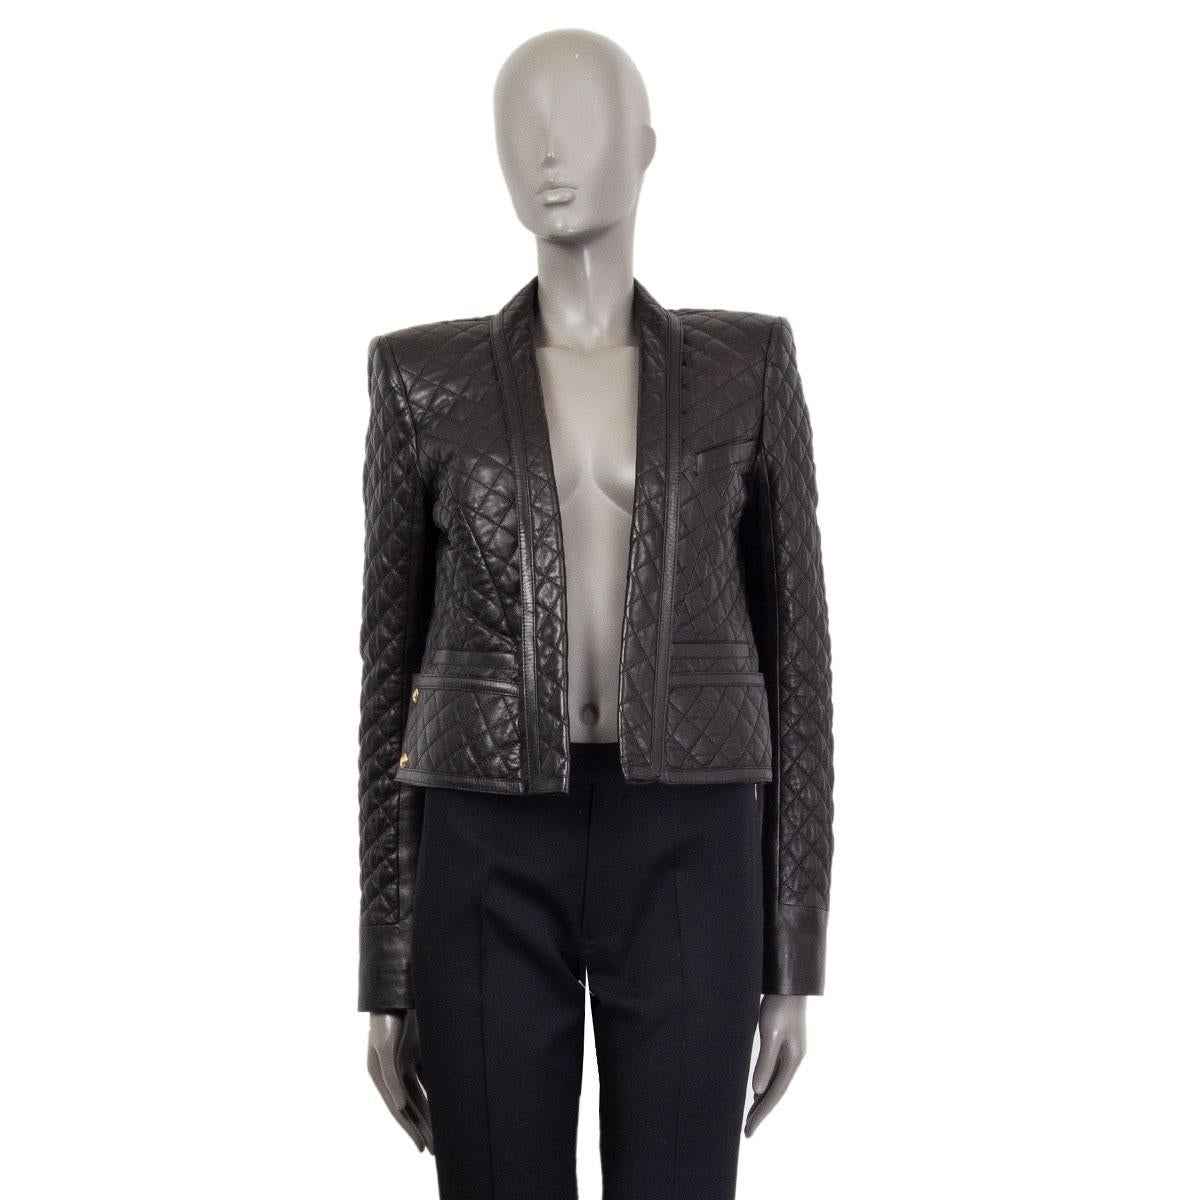 100% authentic Balmain quilted leather blazer in black lambskin (100%). With an open front, shawl lapel, three straight pockets and buttons at the back of the sleeves. Lined in black viscose (52%) cupro (48%). Has been worn and is in excellent